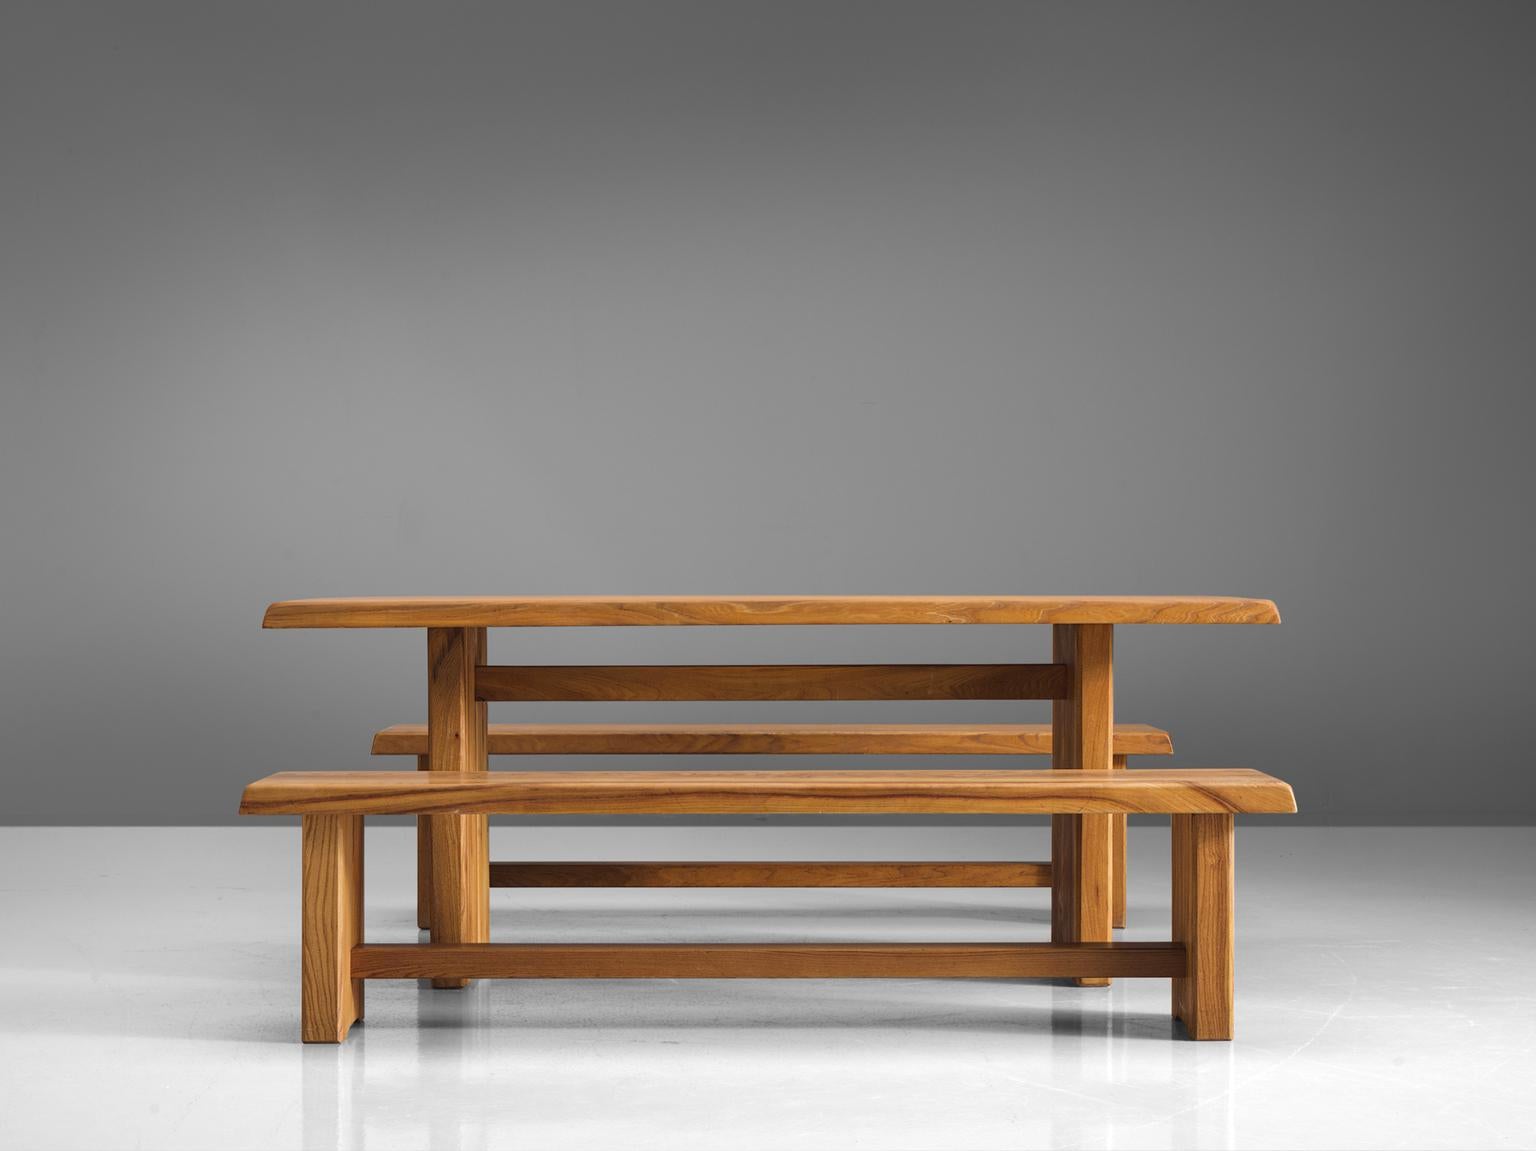 French Pierre Chapo Elm Table with Benches